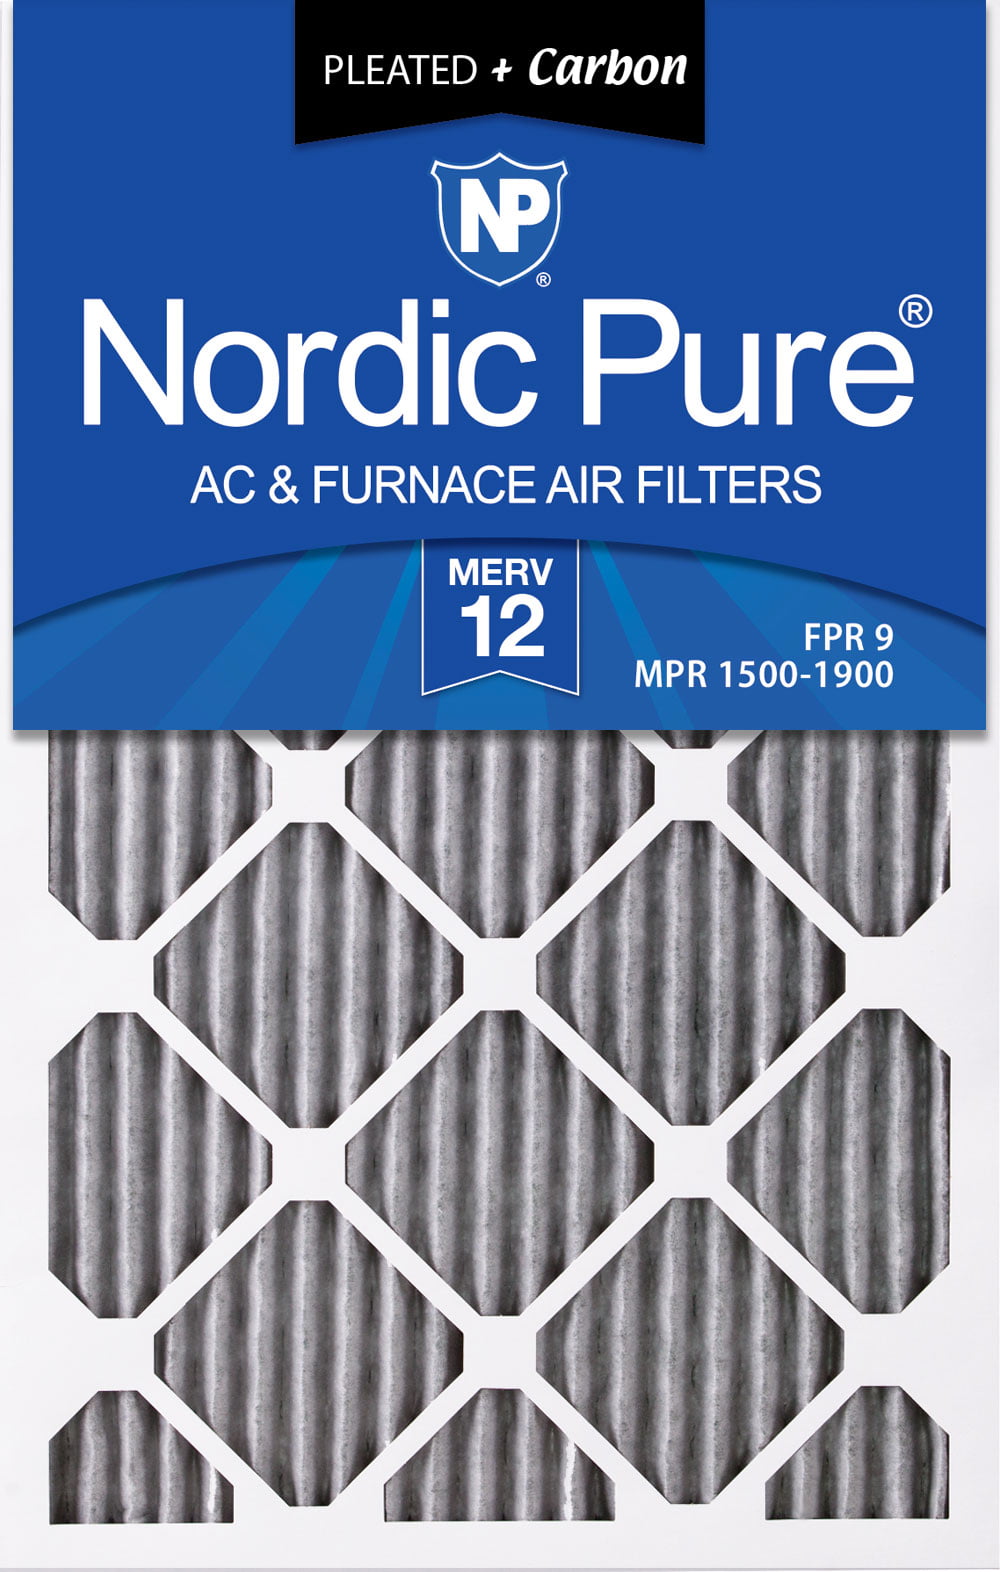 Nordic Pure 20x24x1 MERV 13 Plus Carbon Pleated AC Furnace Air Filters 20x24x1M13+C-2 2 Piece